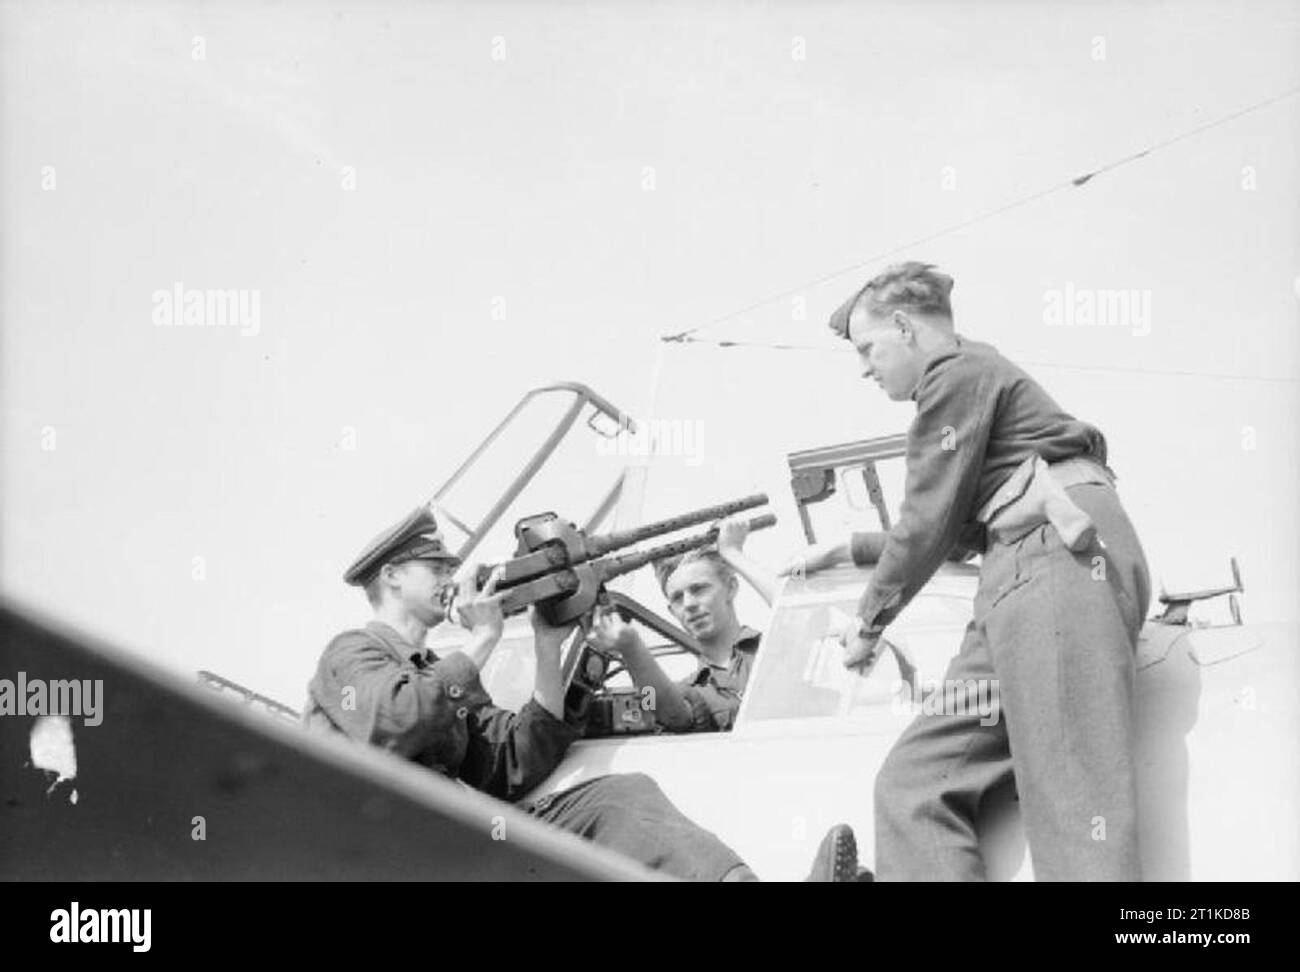 The Royal Air Force in Denmark Following the Liberation, 1945 German prisoners of war remove the machine guns from a Messerschmitt Bf 110G night fighter under the supervision of a Royal Air Force armament officer, 1945. Stock Photo